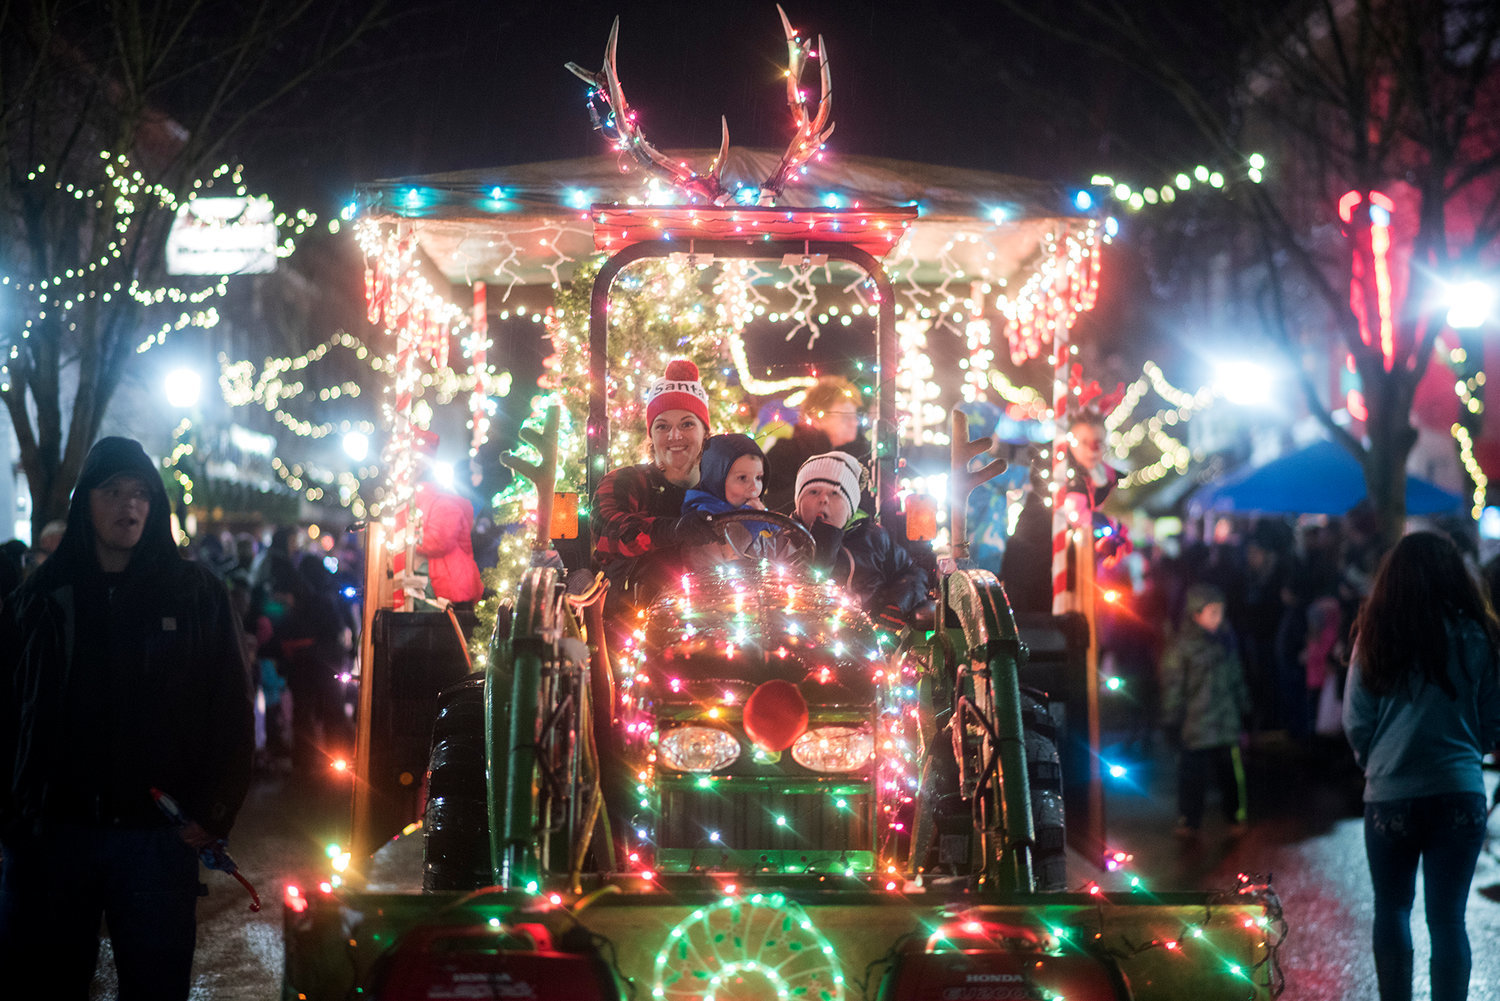 Image from the 2016 Centralia Lighted Tractor Parade on Saturday, Dec. 10 in downtown Centralia.